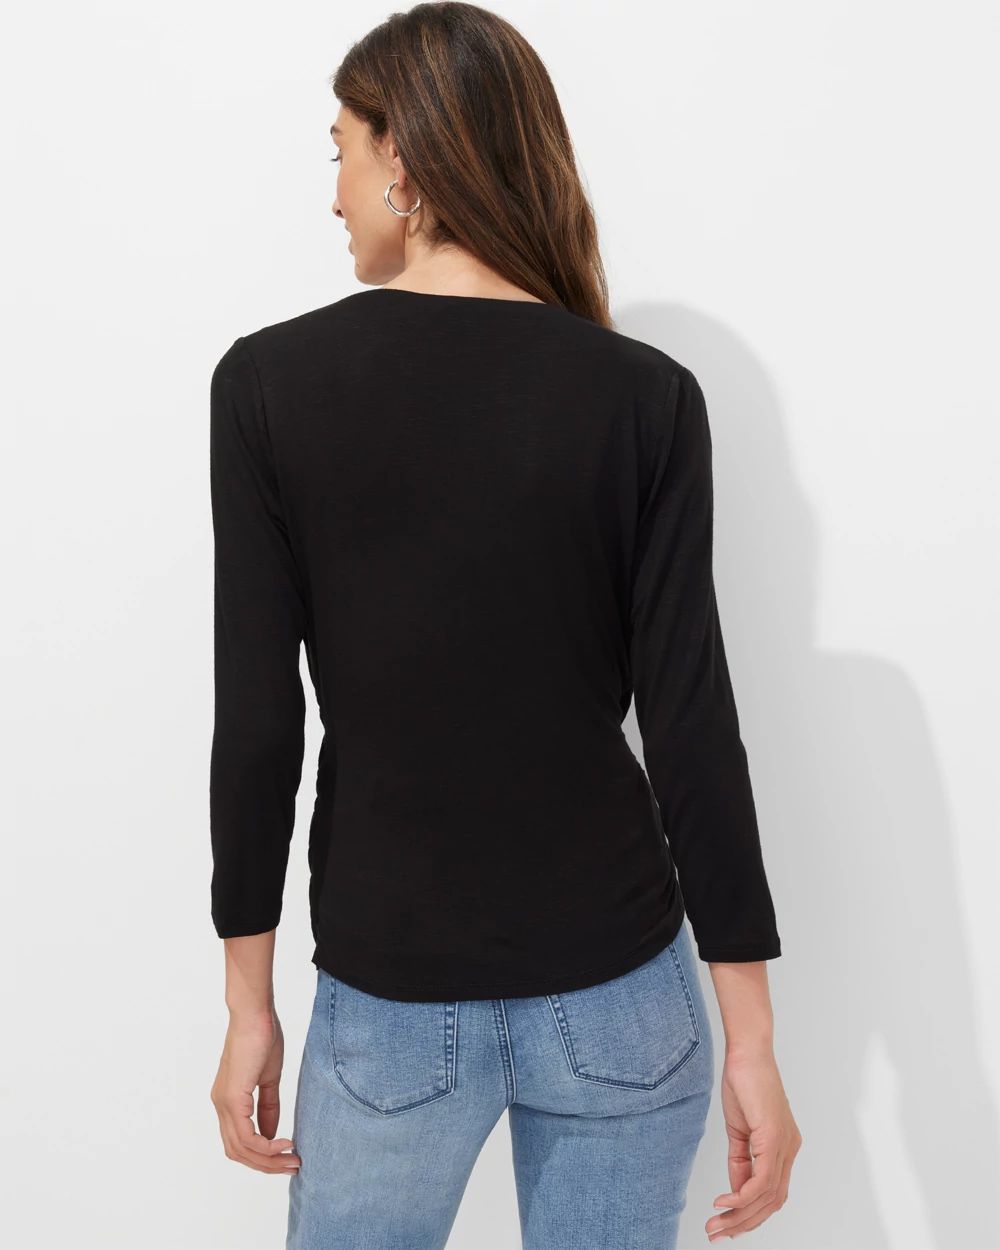 Outlet WHBM Surplice 3/4-Sleeve Tee click to view larger image.